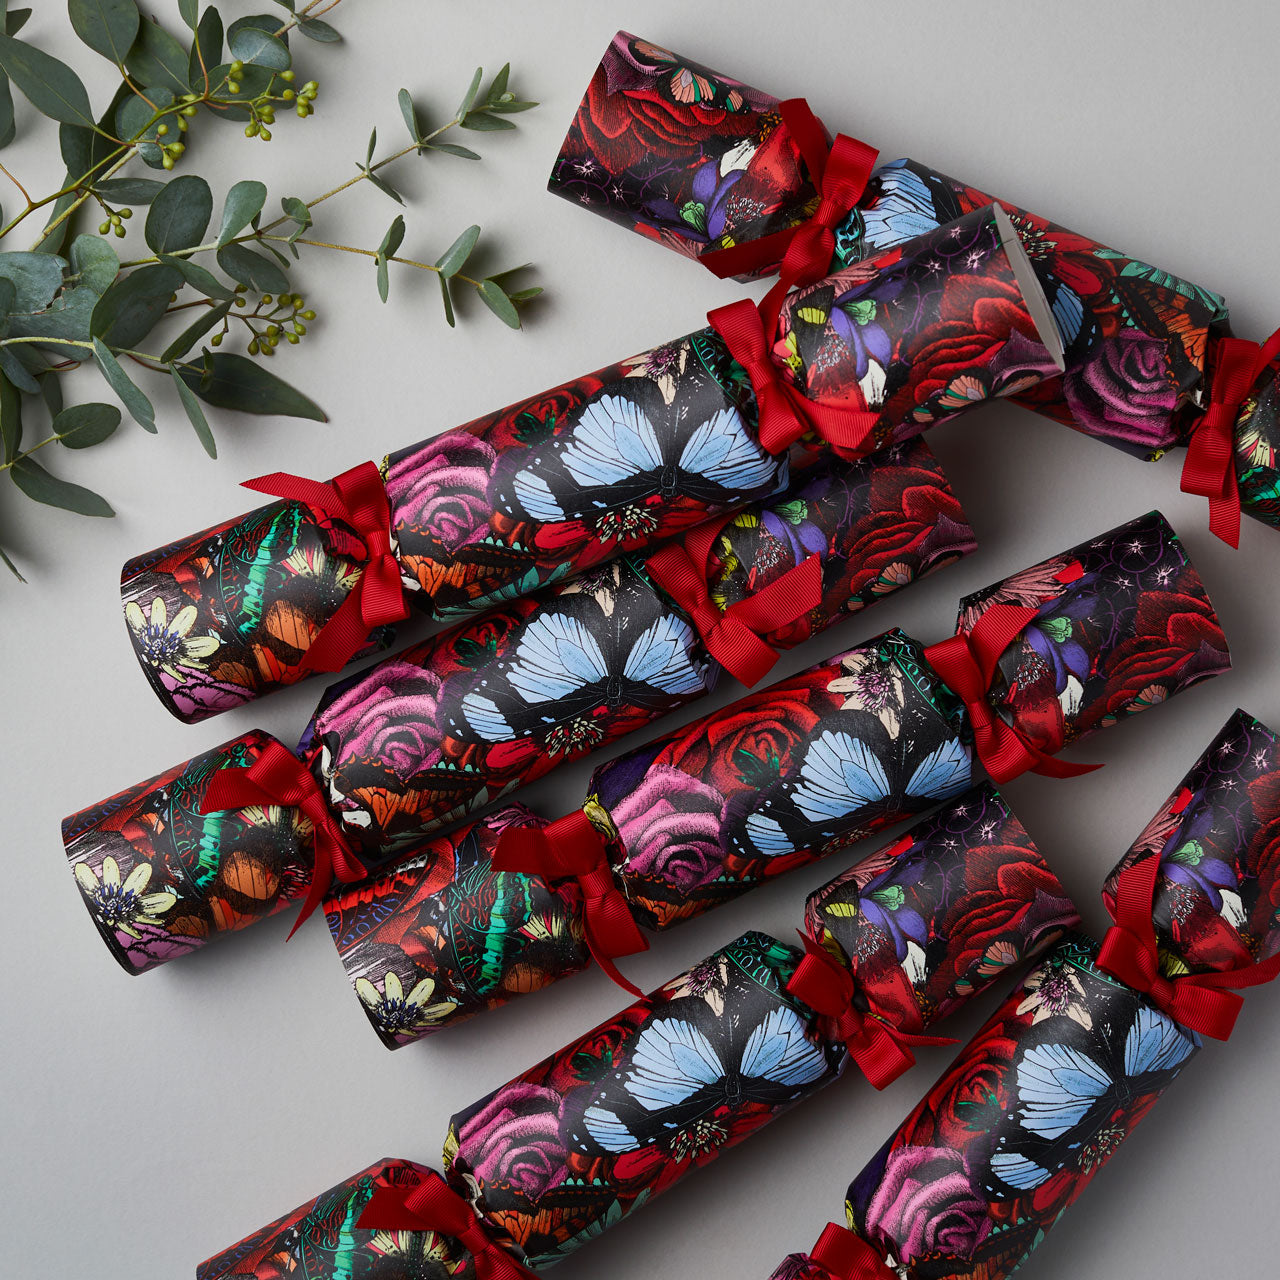 "Butterfly" Luxury Candle Christmas Crackers